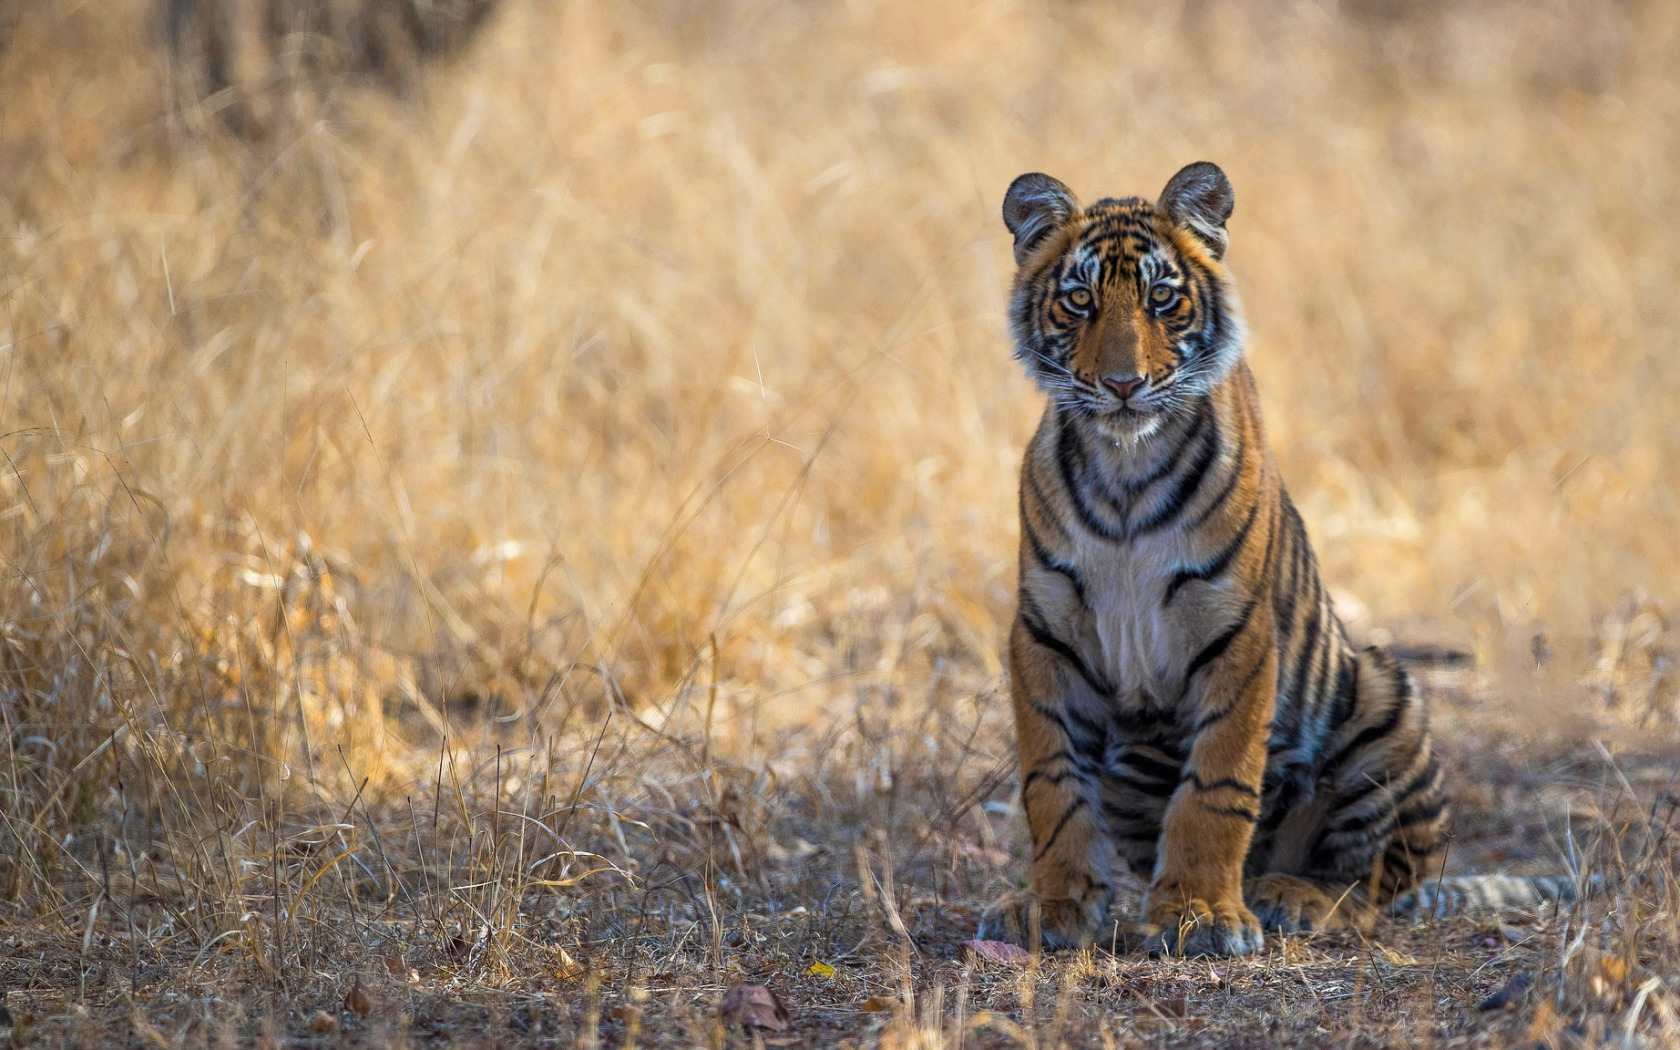 Royal Bengal Tiger: Over 12,793 Royalty-Free Licensable Stock Photos |  Shutterstock